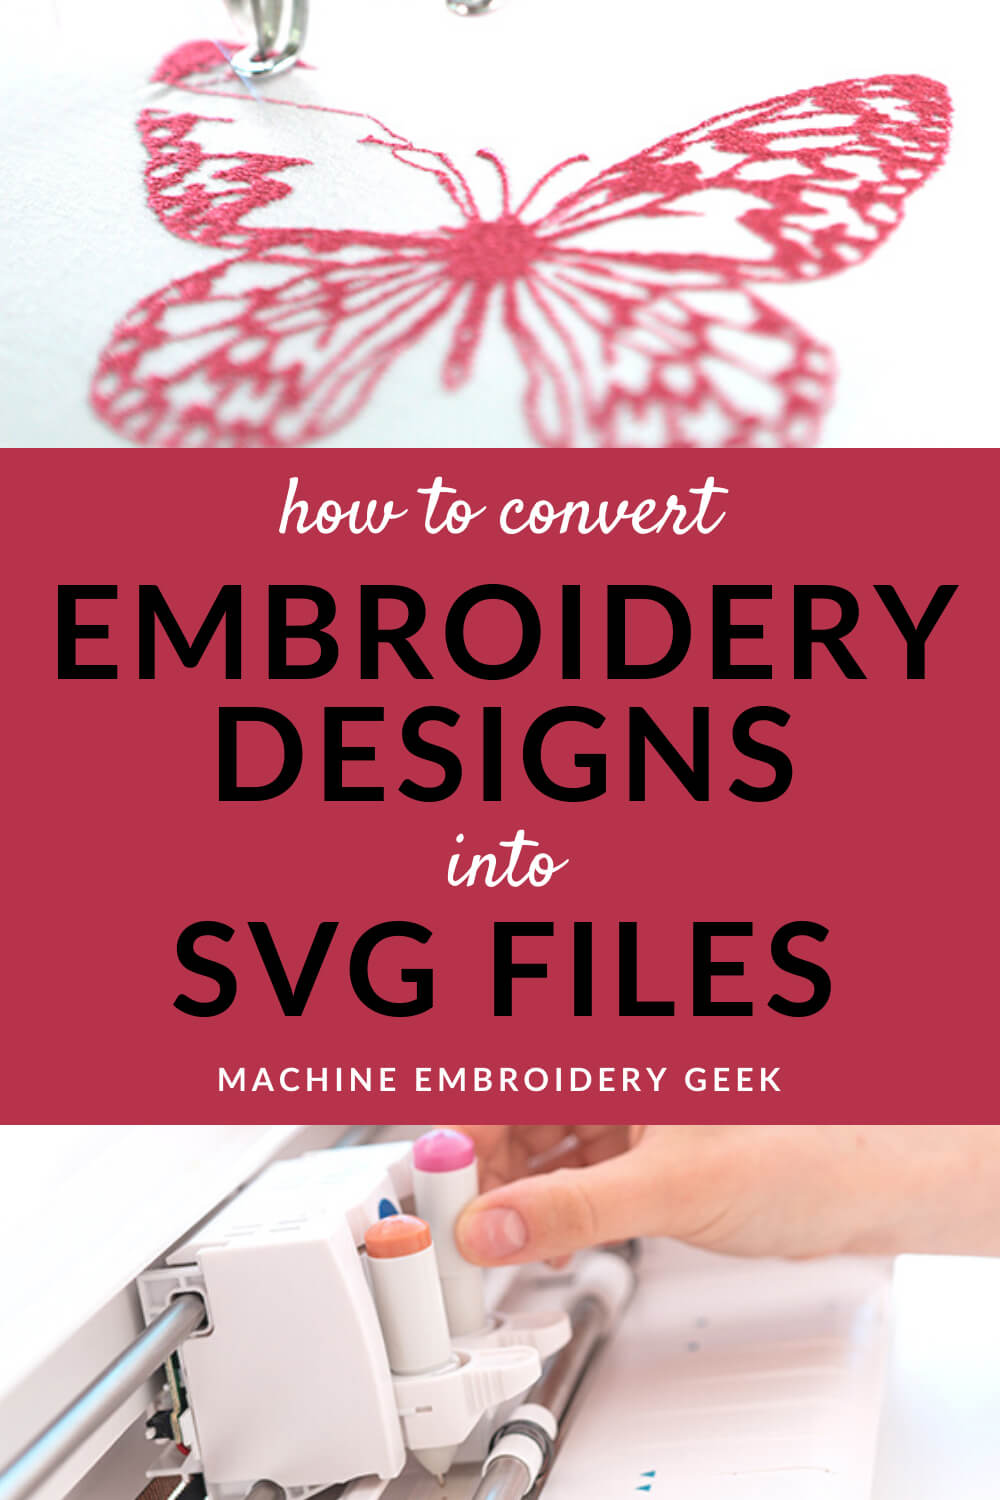 How to create an embroidery design into an SVG file